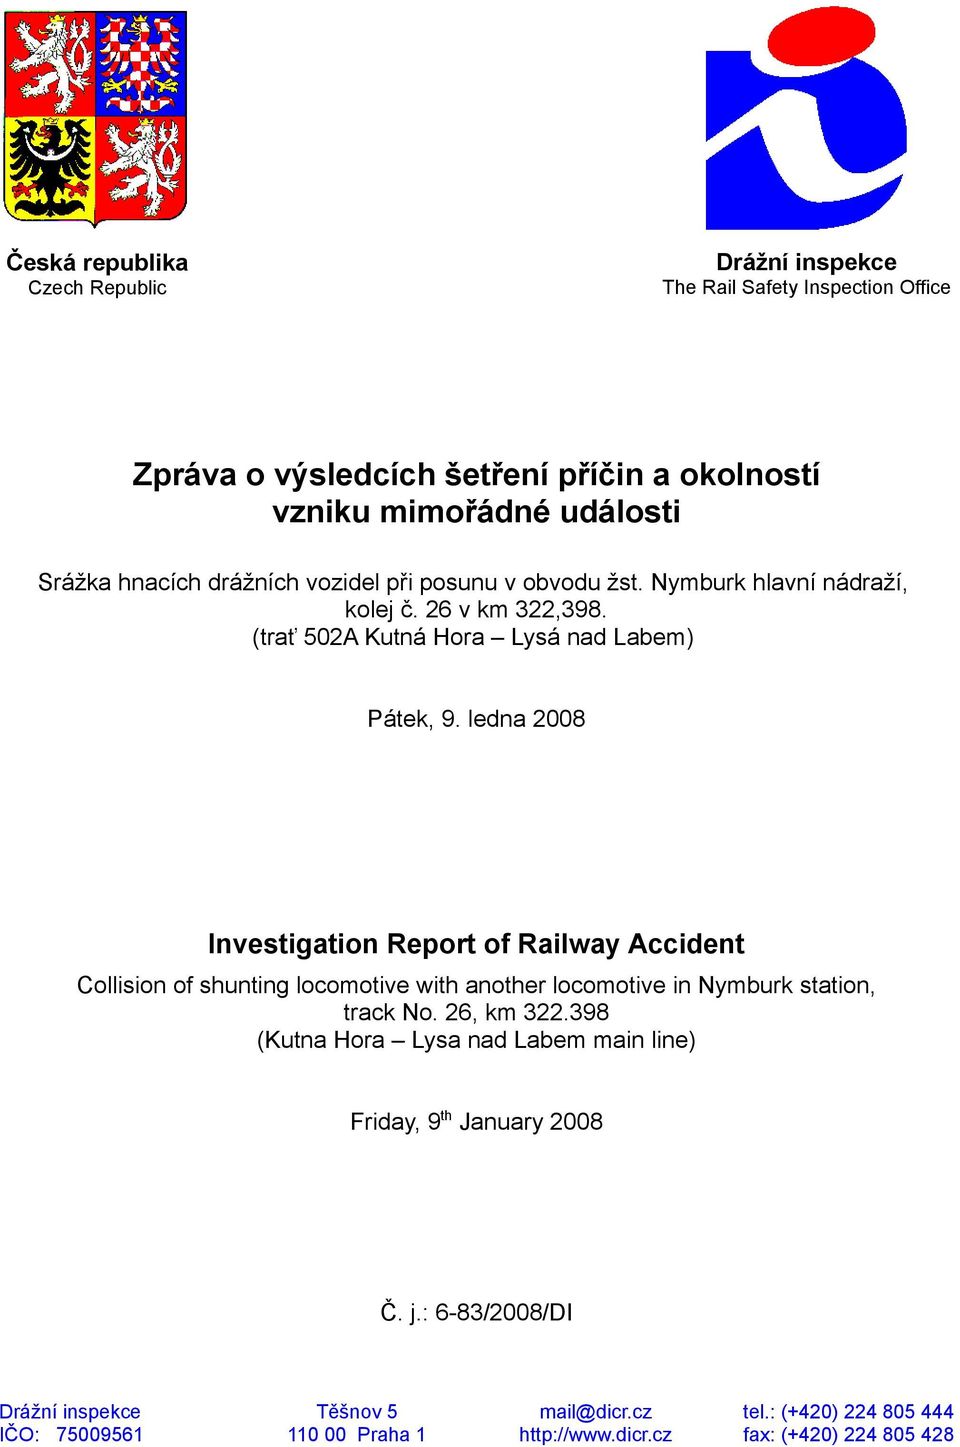 ledna 2008 Investigation Report of Railway Accident Collision of shunting locomotive with another locomotive in Nymburk station, track No. 26, km 322.